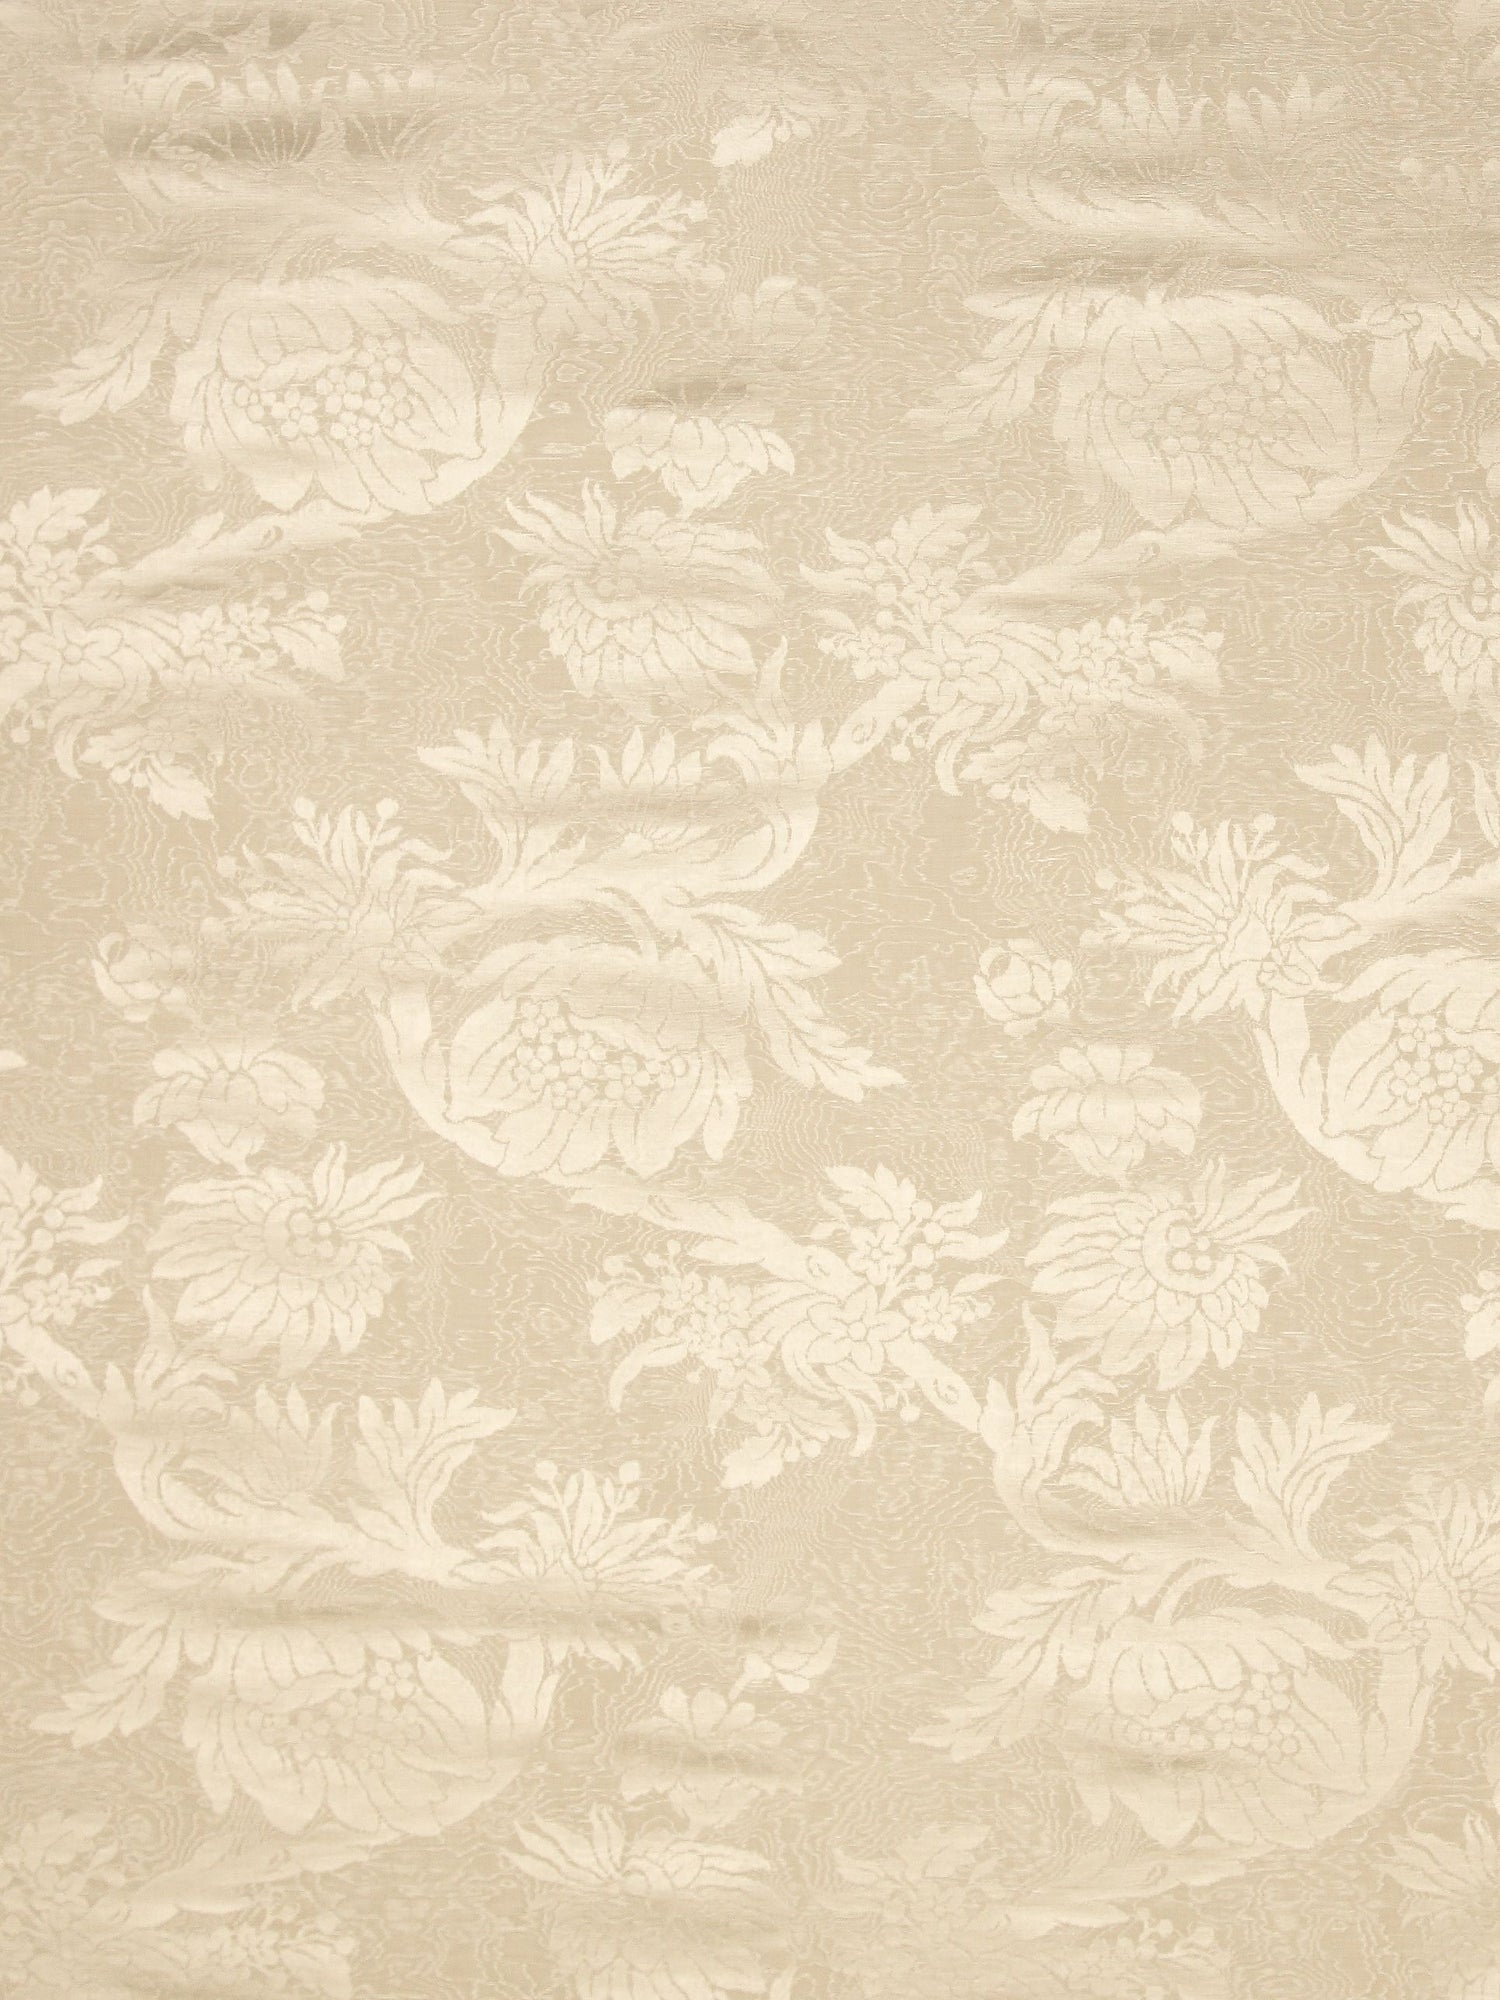 Damas Parc Monceau fabric in cream color - pattern number SC 000126695 - by Scalamandre in the Scalamandre Fabrics Book 1 collection